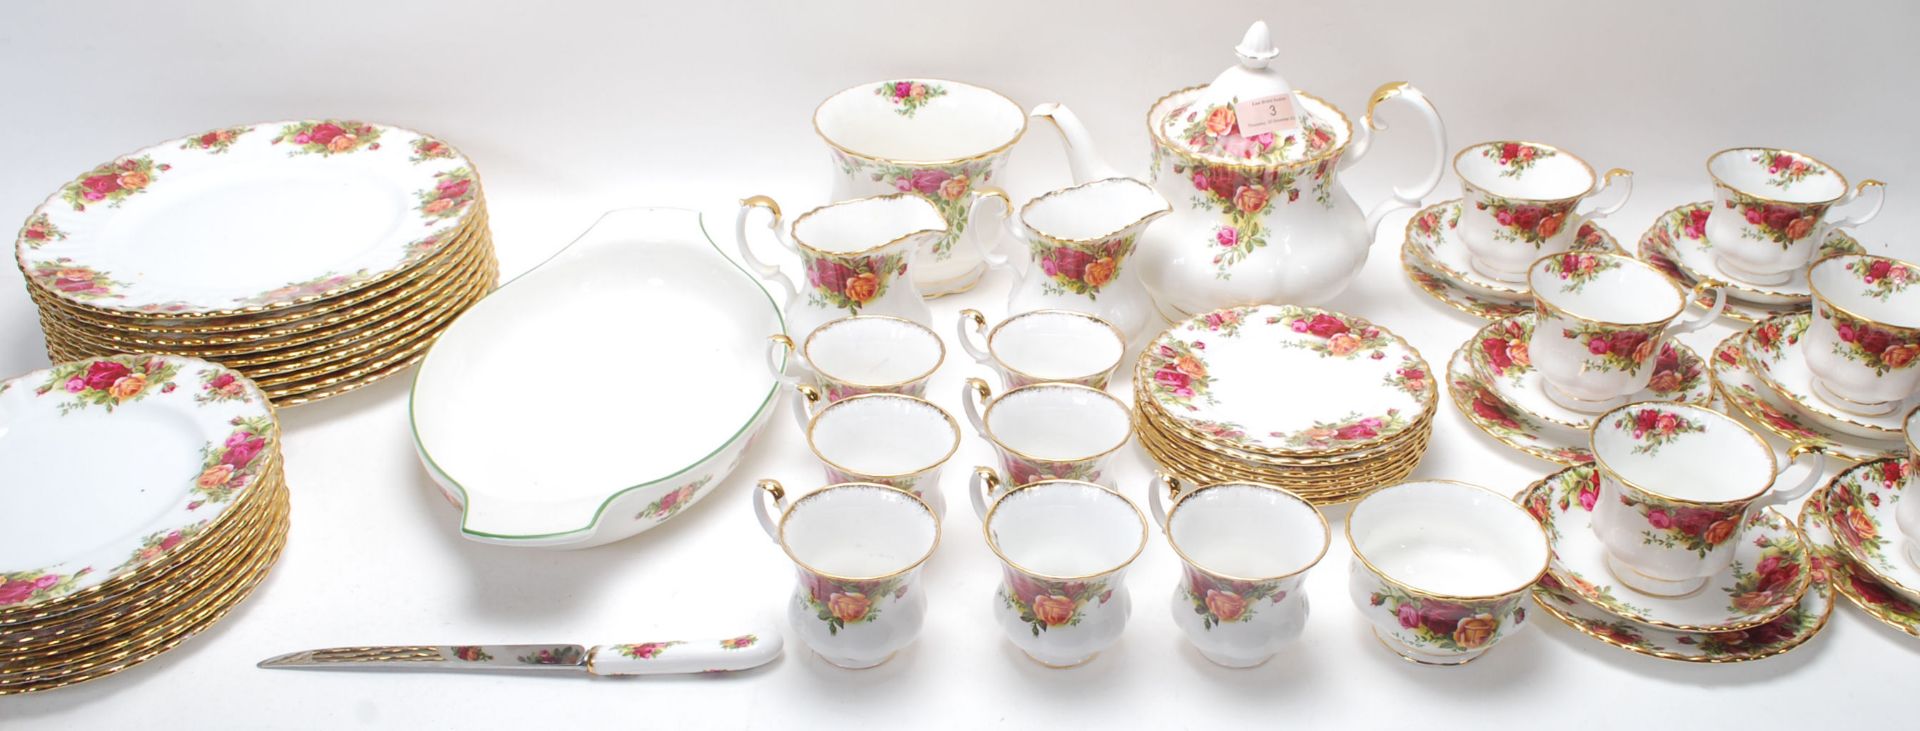 LARGE ROYAL ALBERT OLD COUNTRY ROSES TEA SET - DINING SERVICE